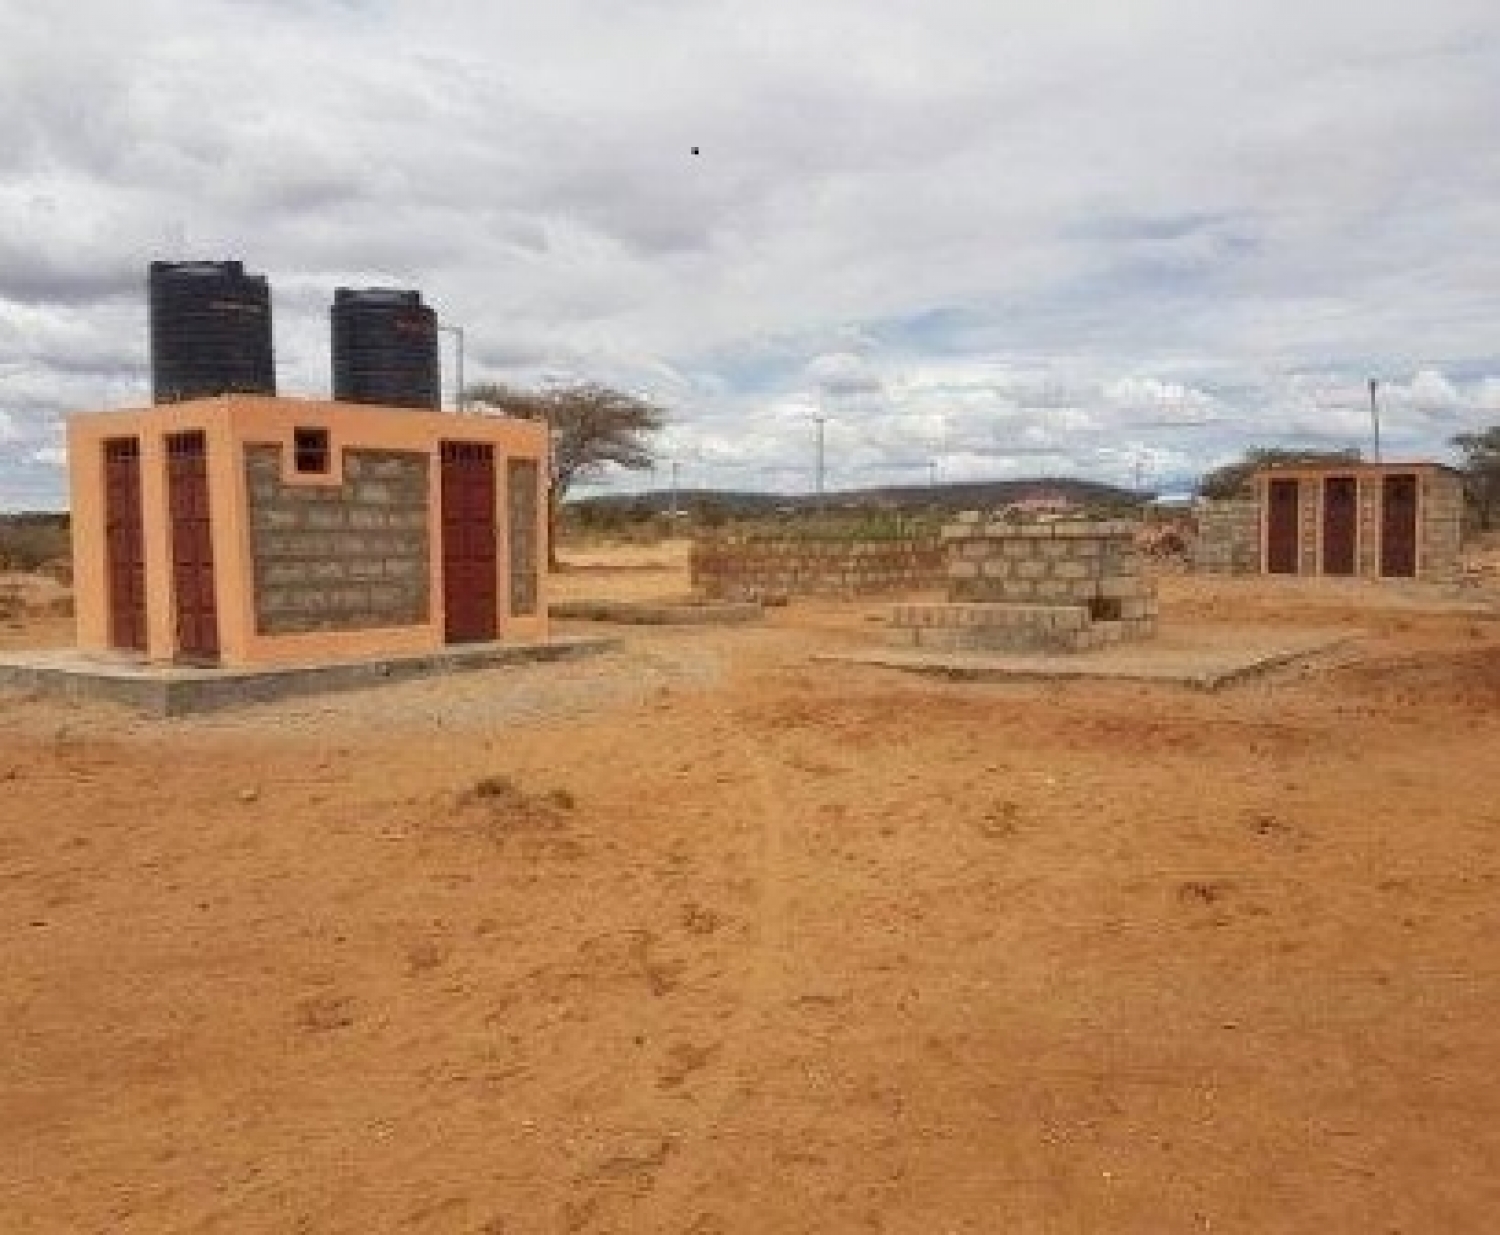 Provide students with WASH education and facilities